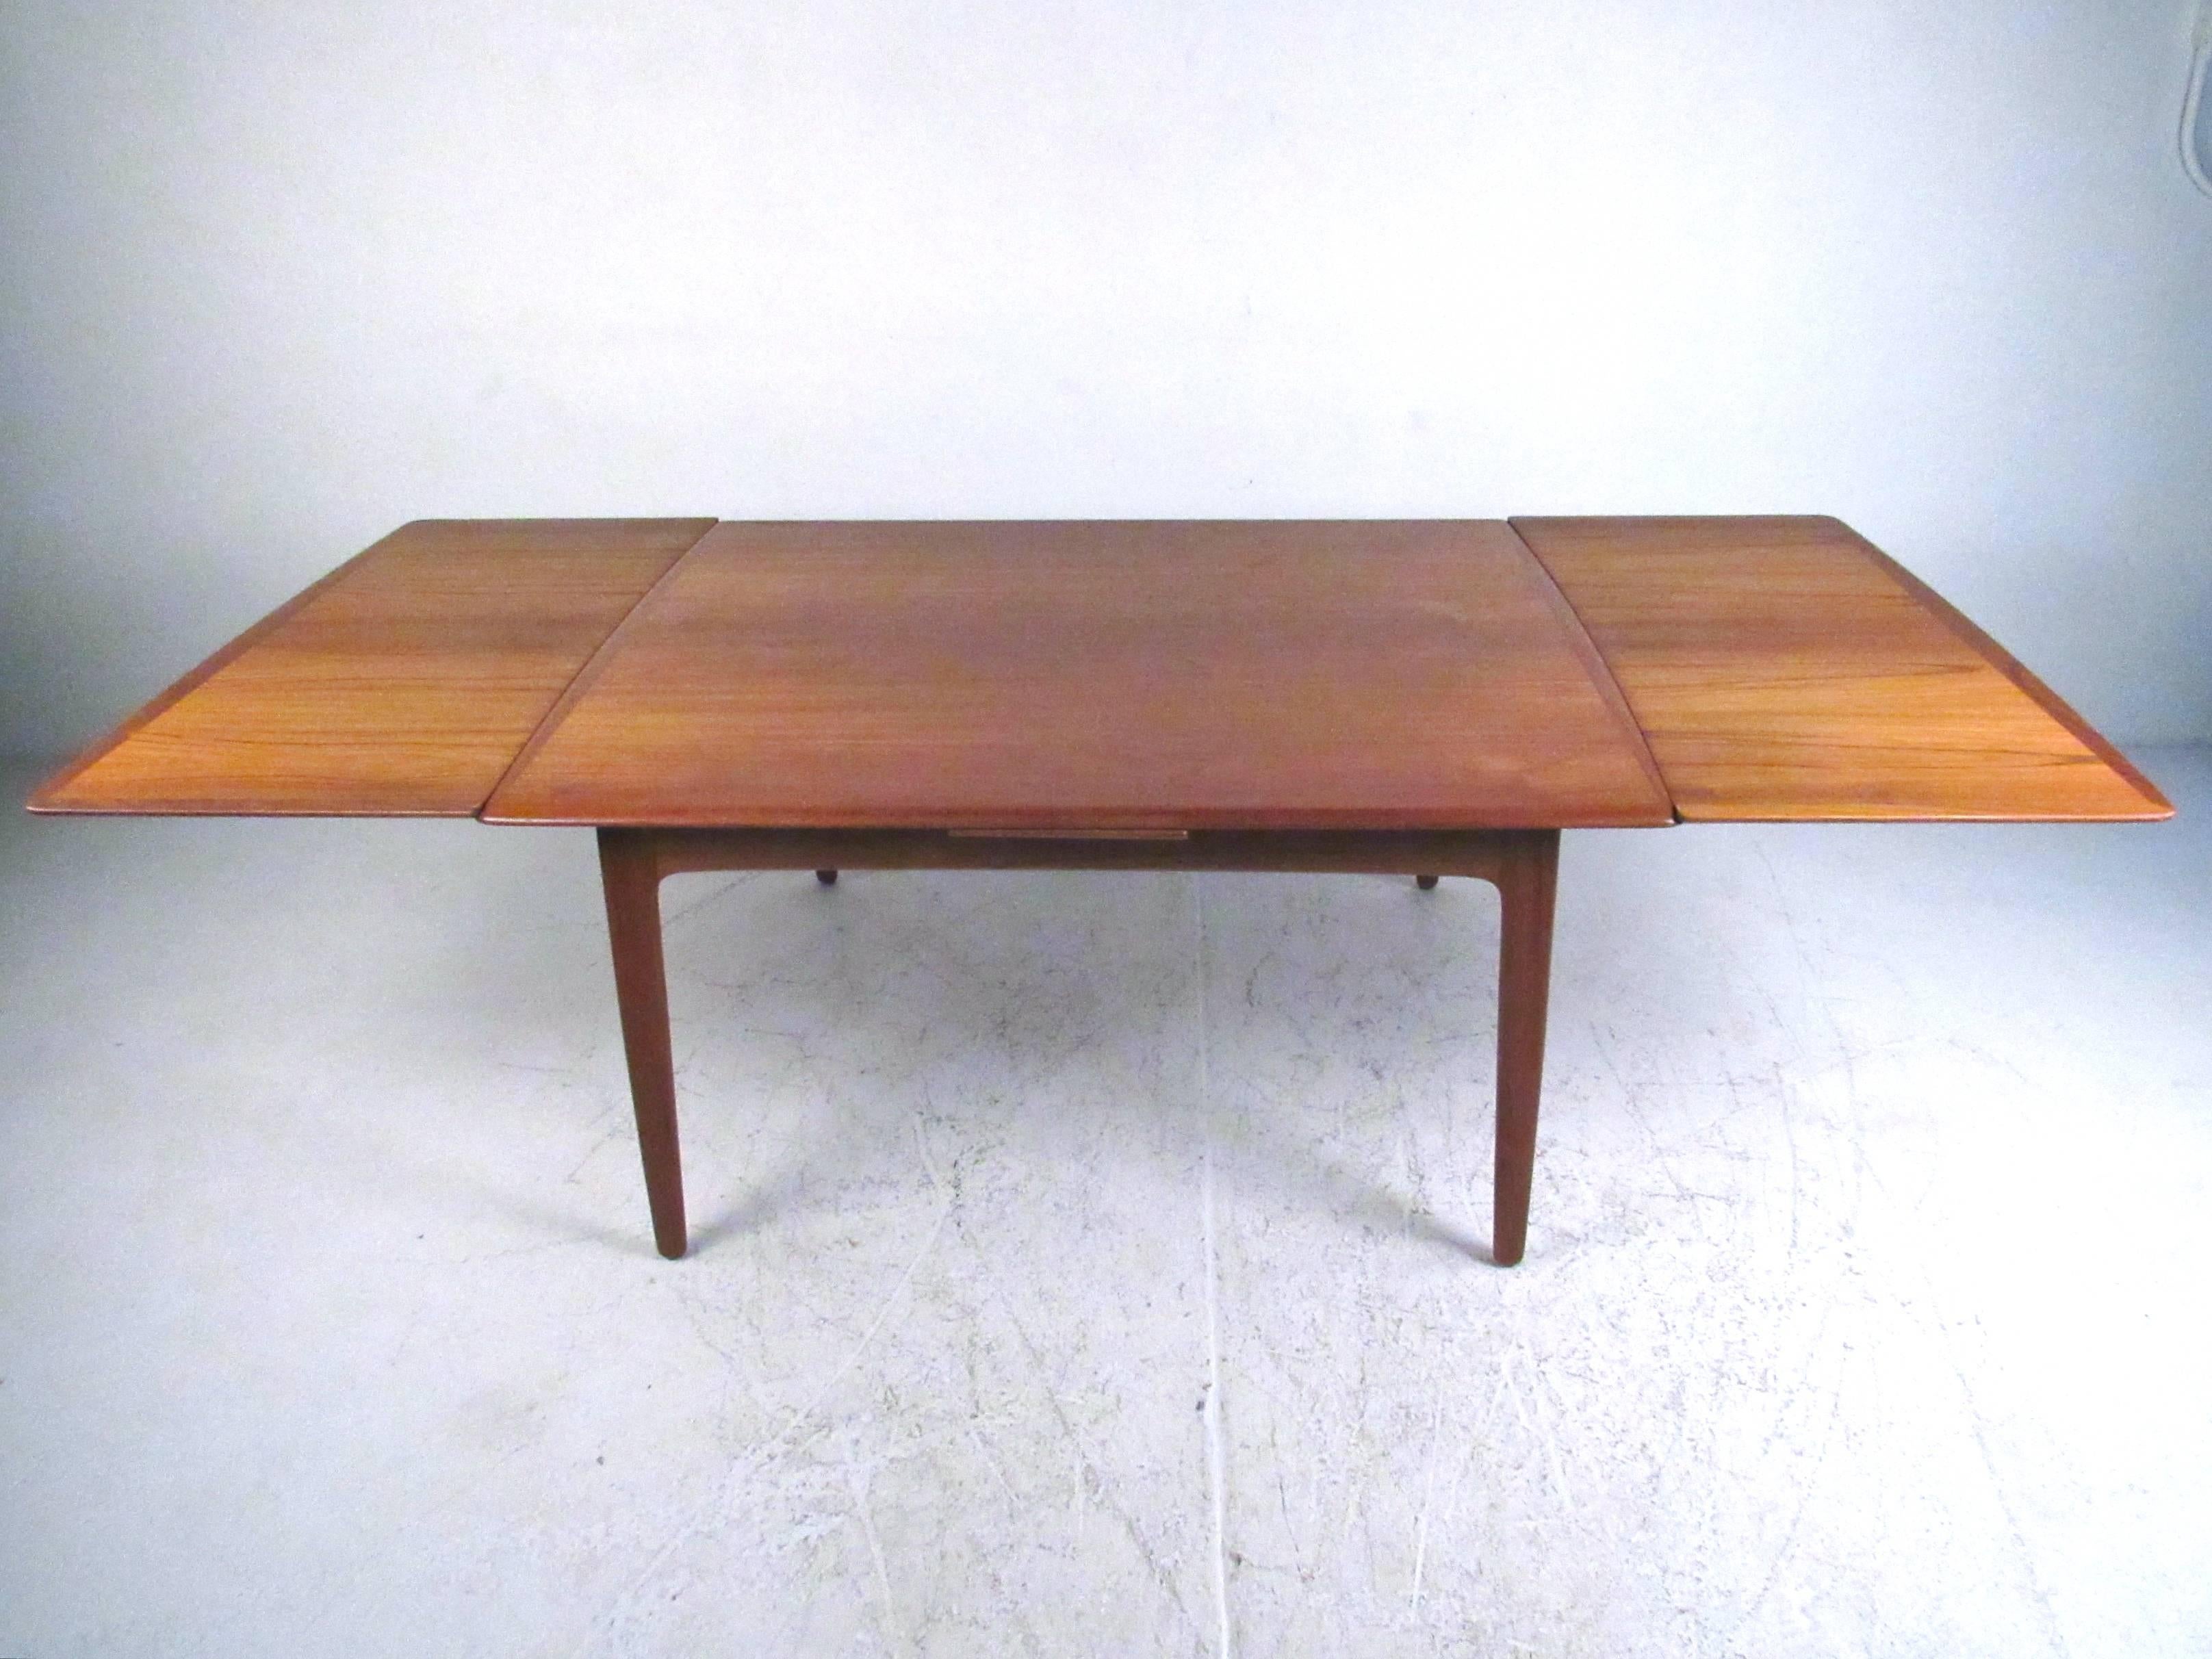 This uniquely sized teak dining table features quality construction, rich teak finish, and easily expands from 56 inches to one hundred inches wide. Draw-leaf Mid-Century style design makes this a versatile table perfect for any dining room or